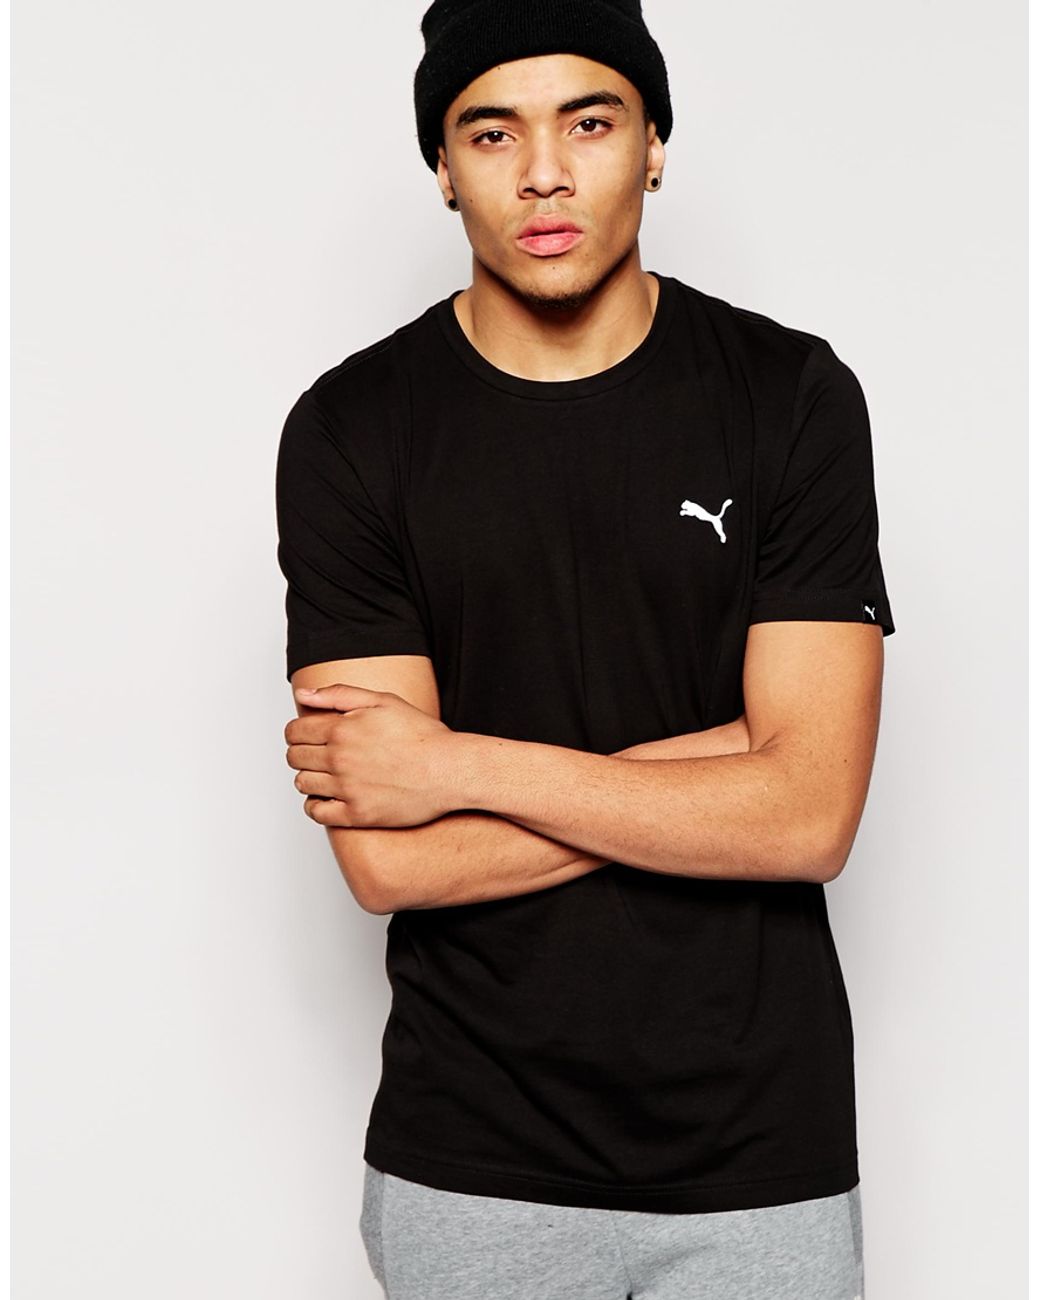 PUMA T-Shirt With Small Black Logo for | Lyst Men in